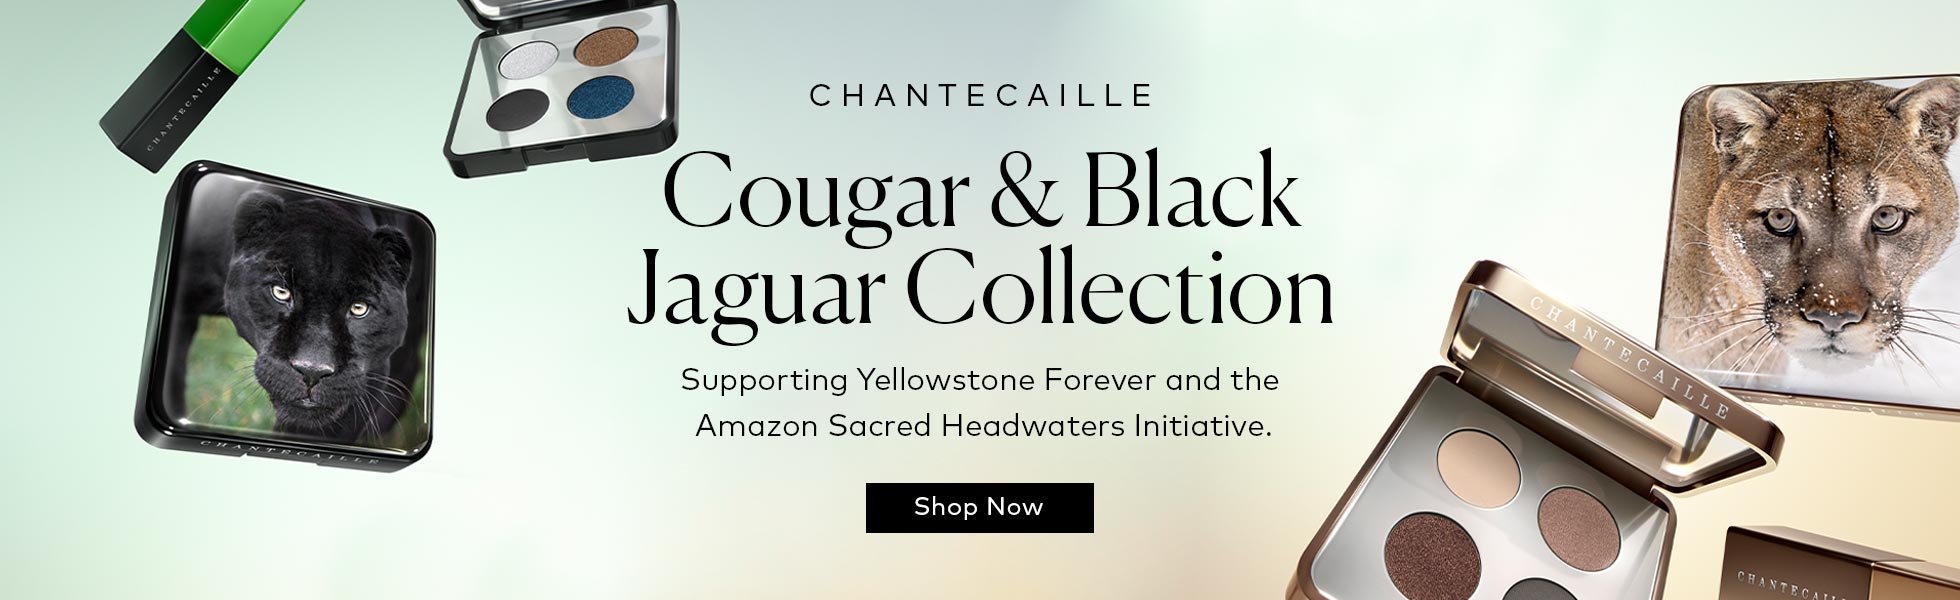 Shop the Chantecaille Yellowstone Collection on Beautylish.com